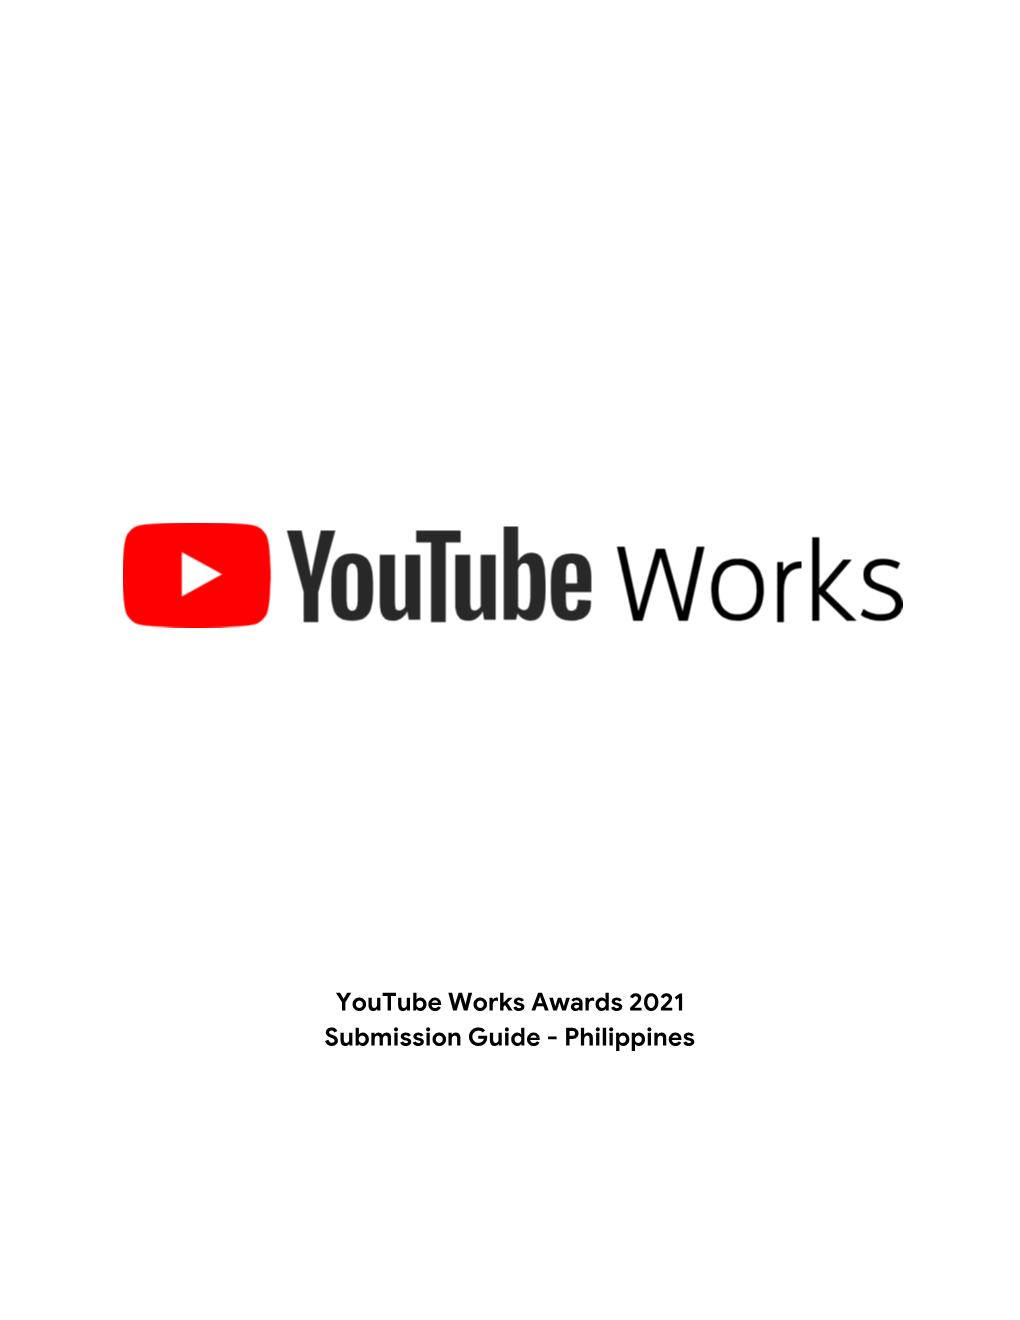 Youtube Works Awards 2021 Submission Guide - Philippines